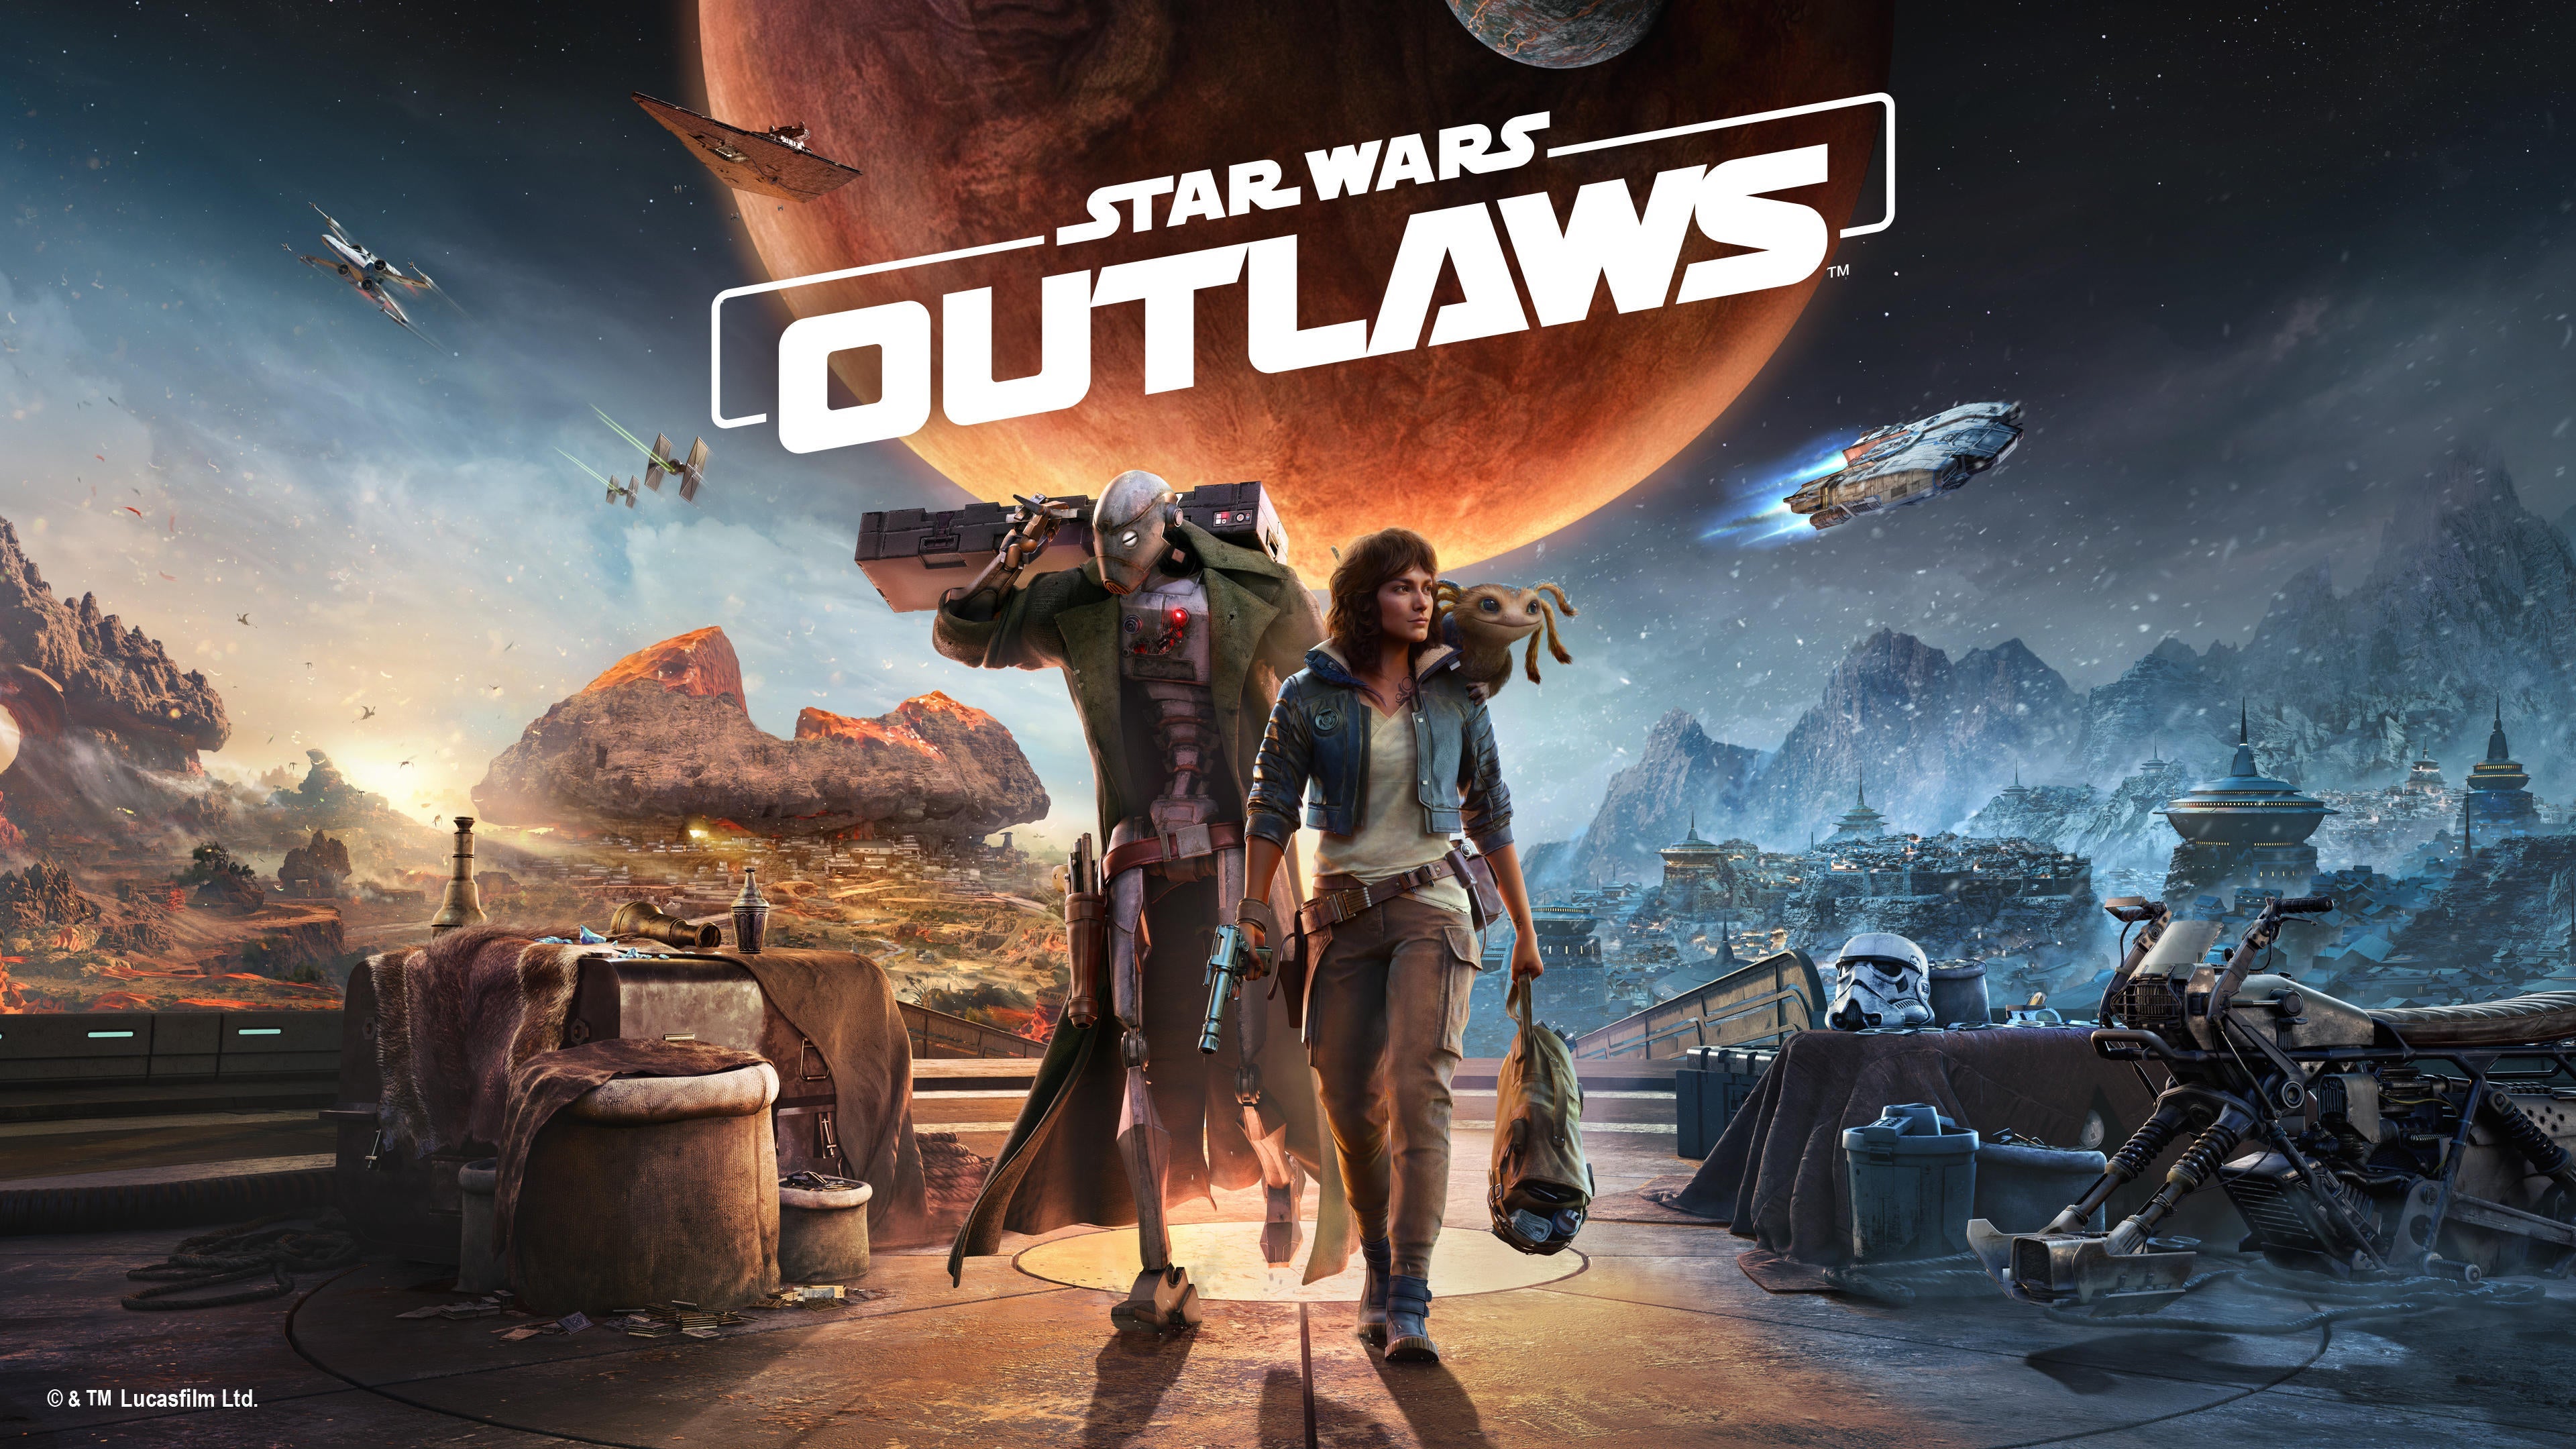 Star Wars Outlaws Team Reveal How Drastically Narrative Choices Can Change the Game